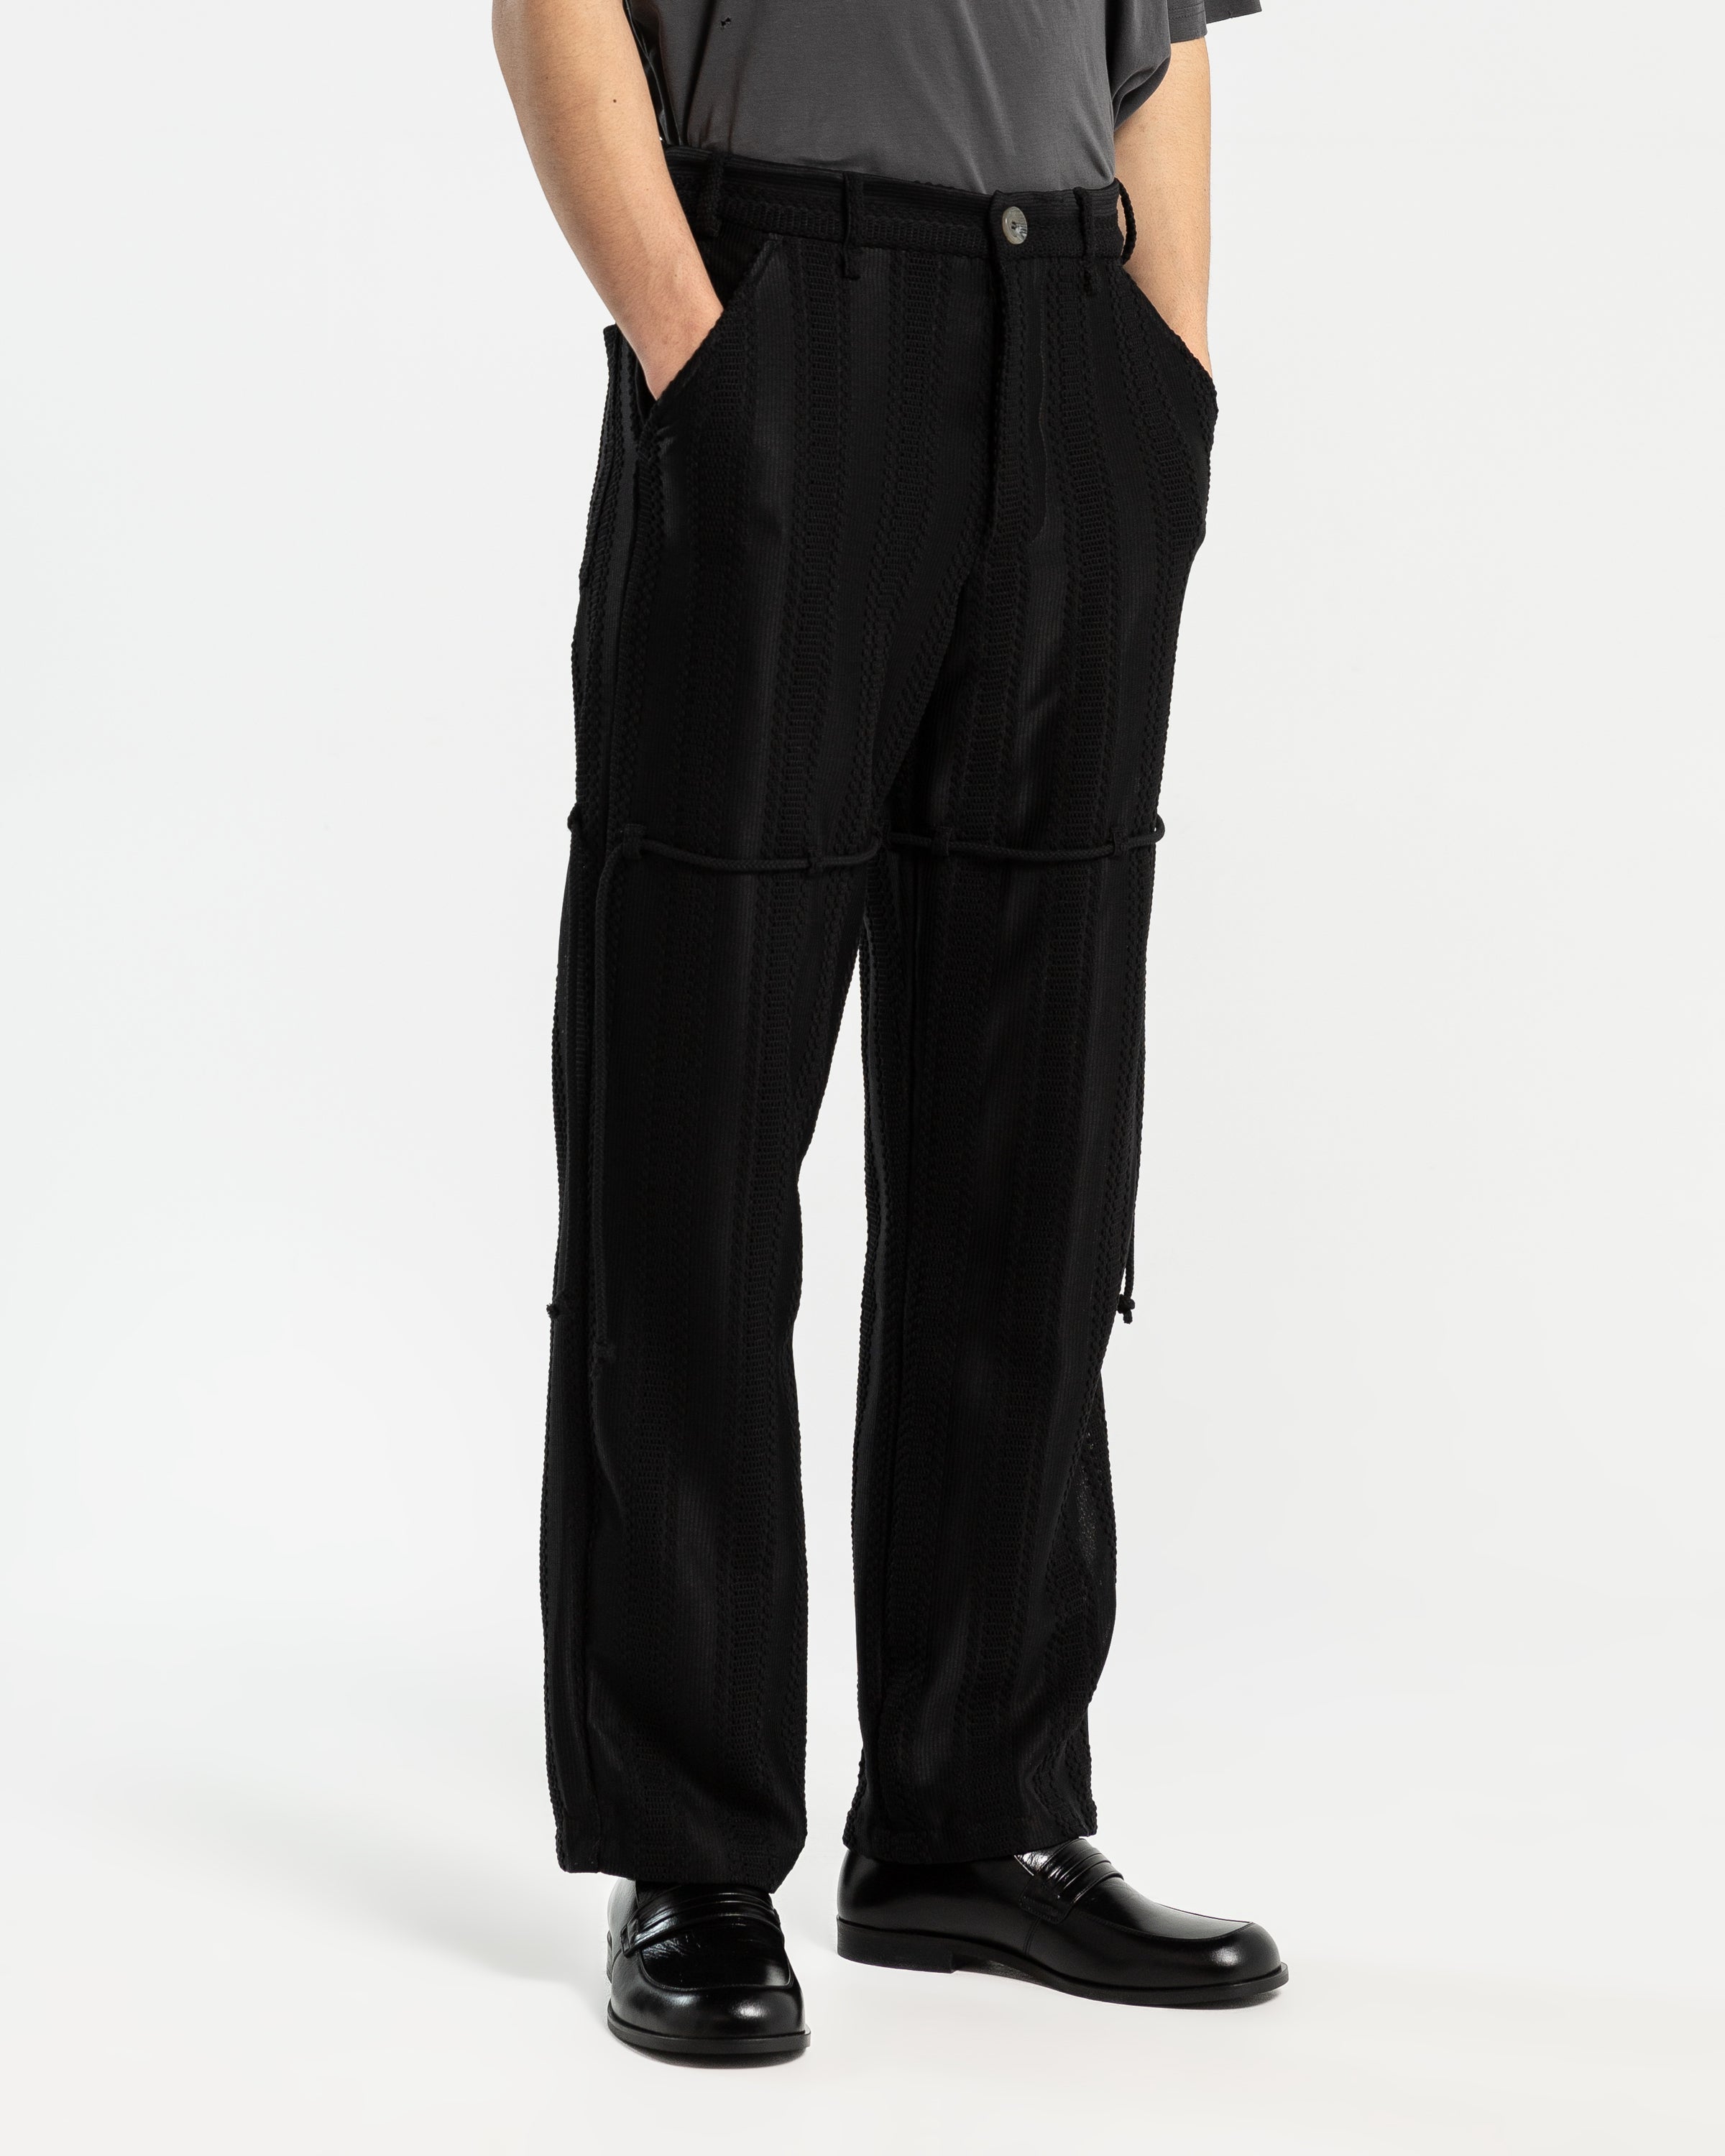 song for the mute 'Portrait' Dress Pant - スラックス